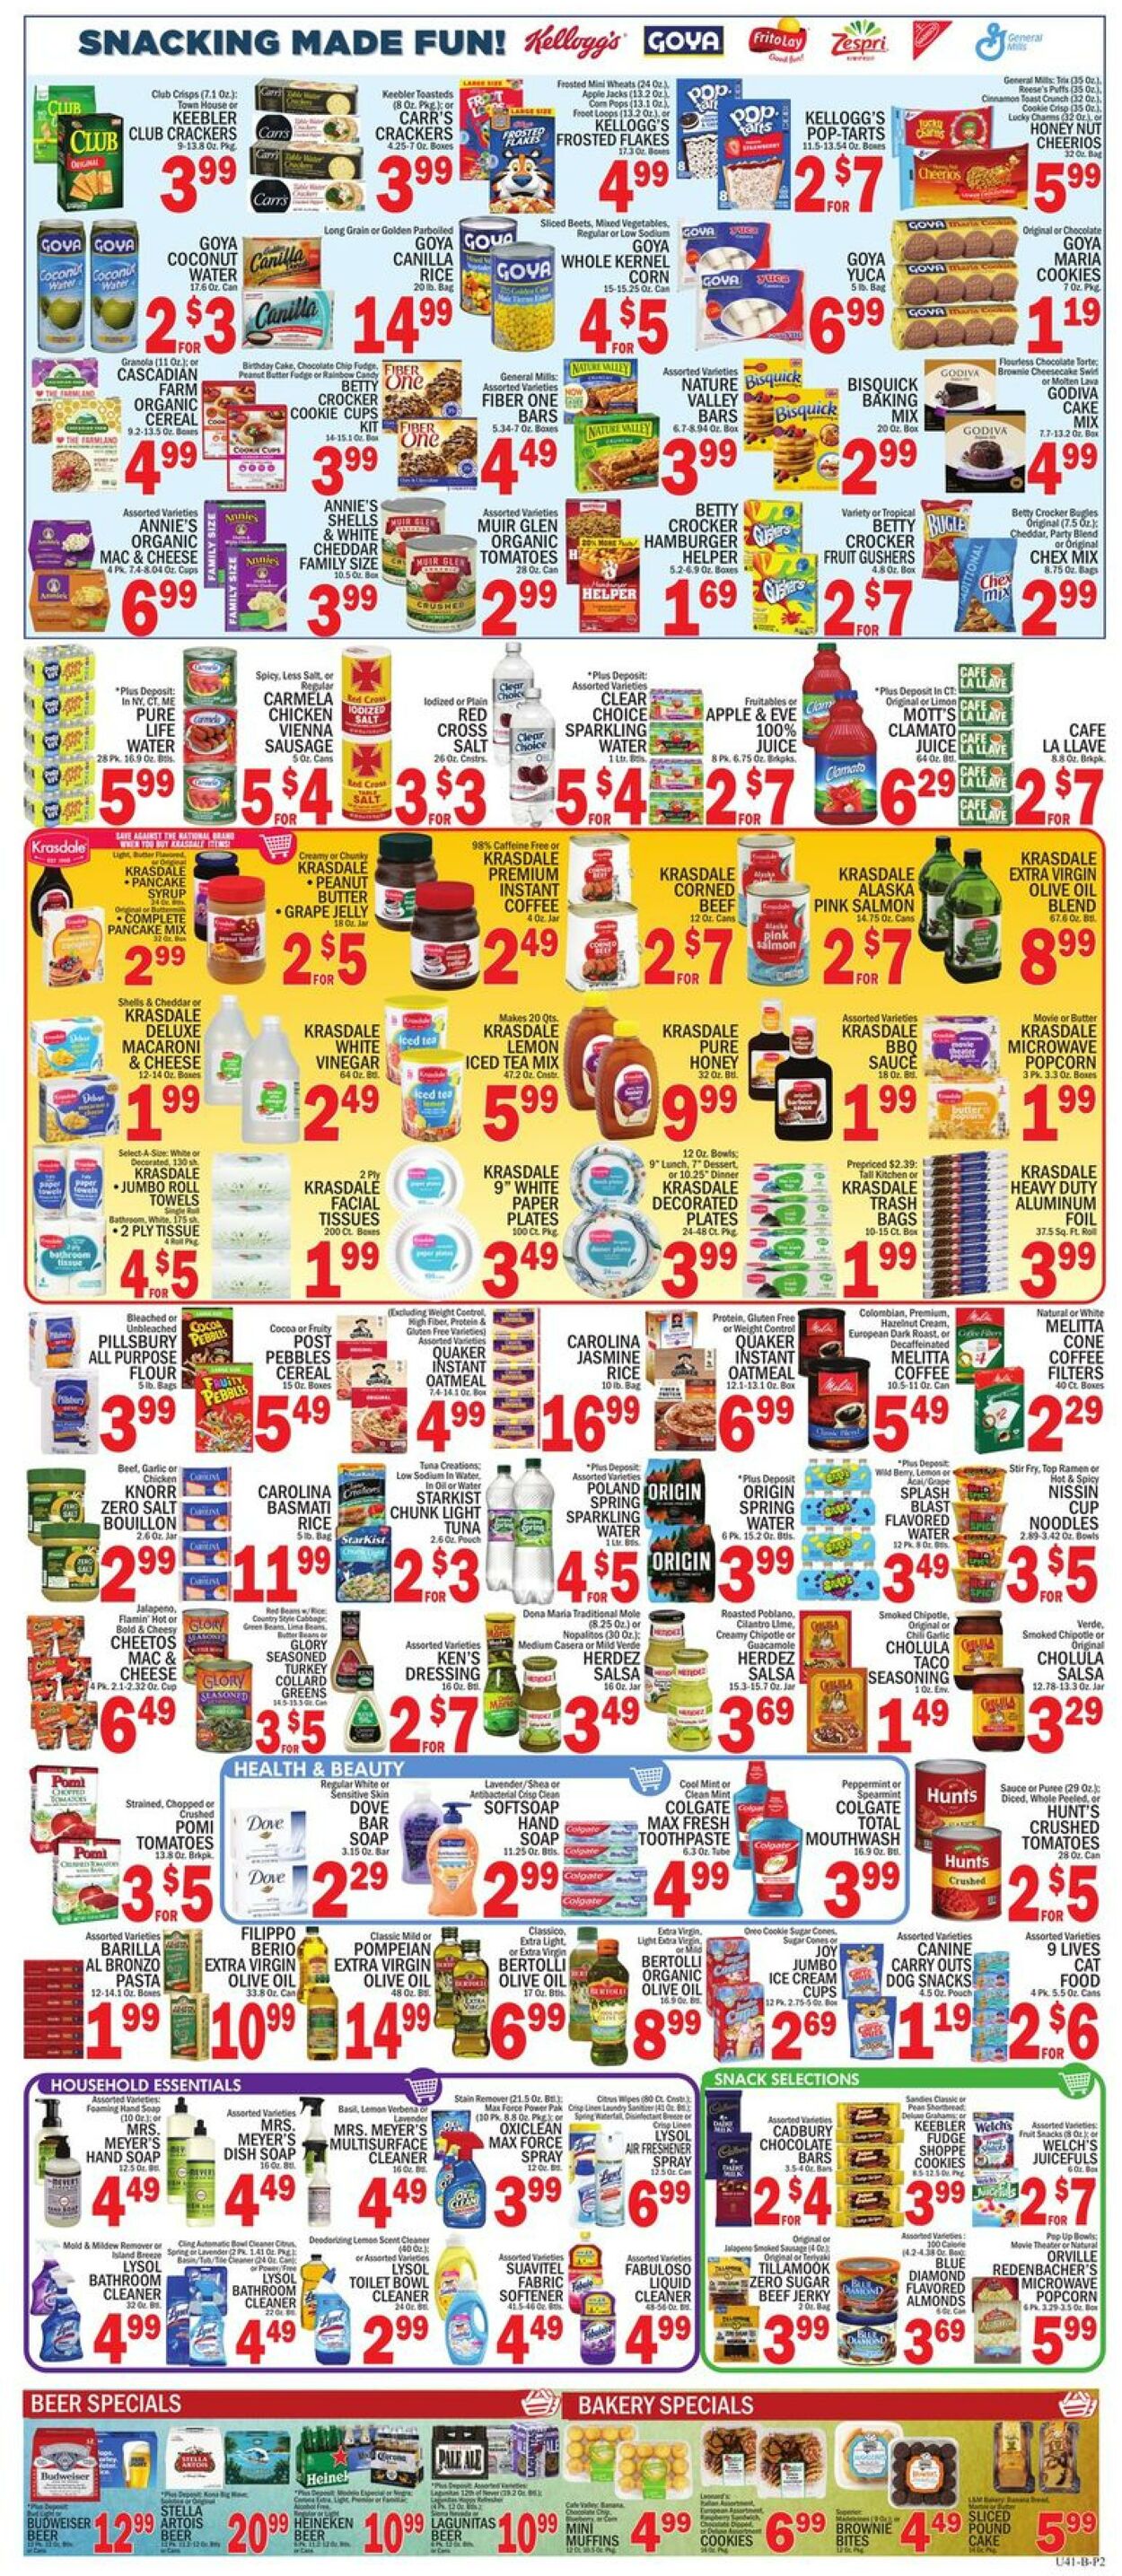 Weekly ad CTown 06/02/2023 - 06/08/2023